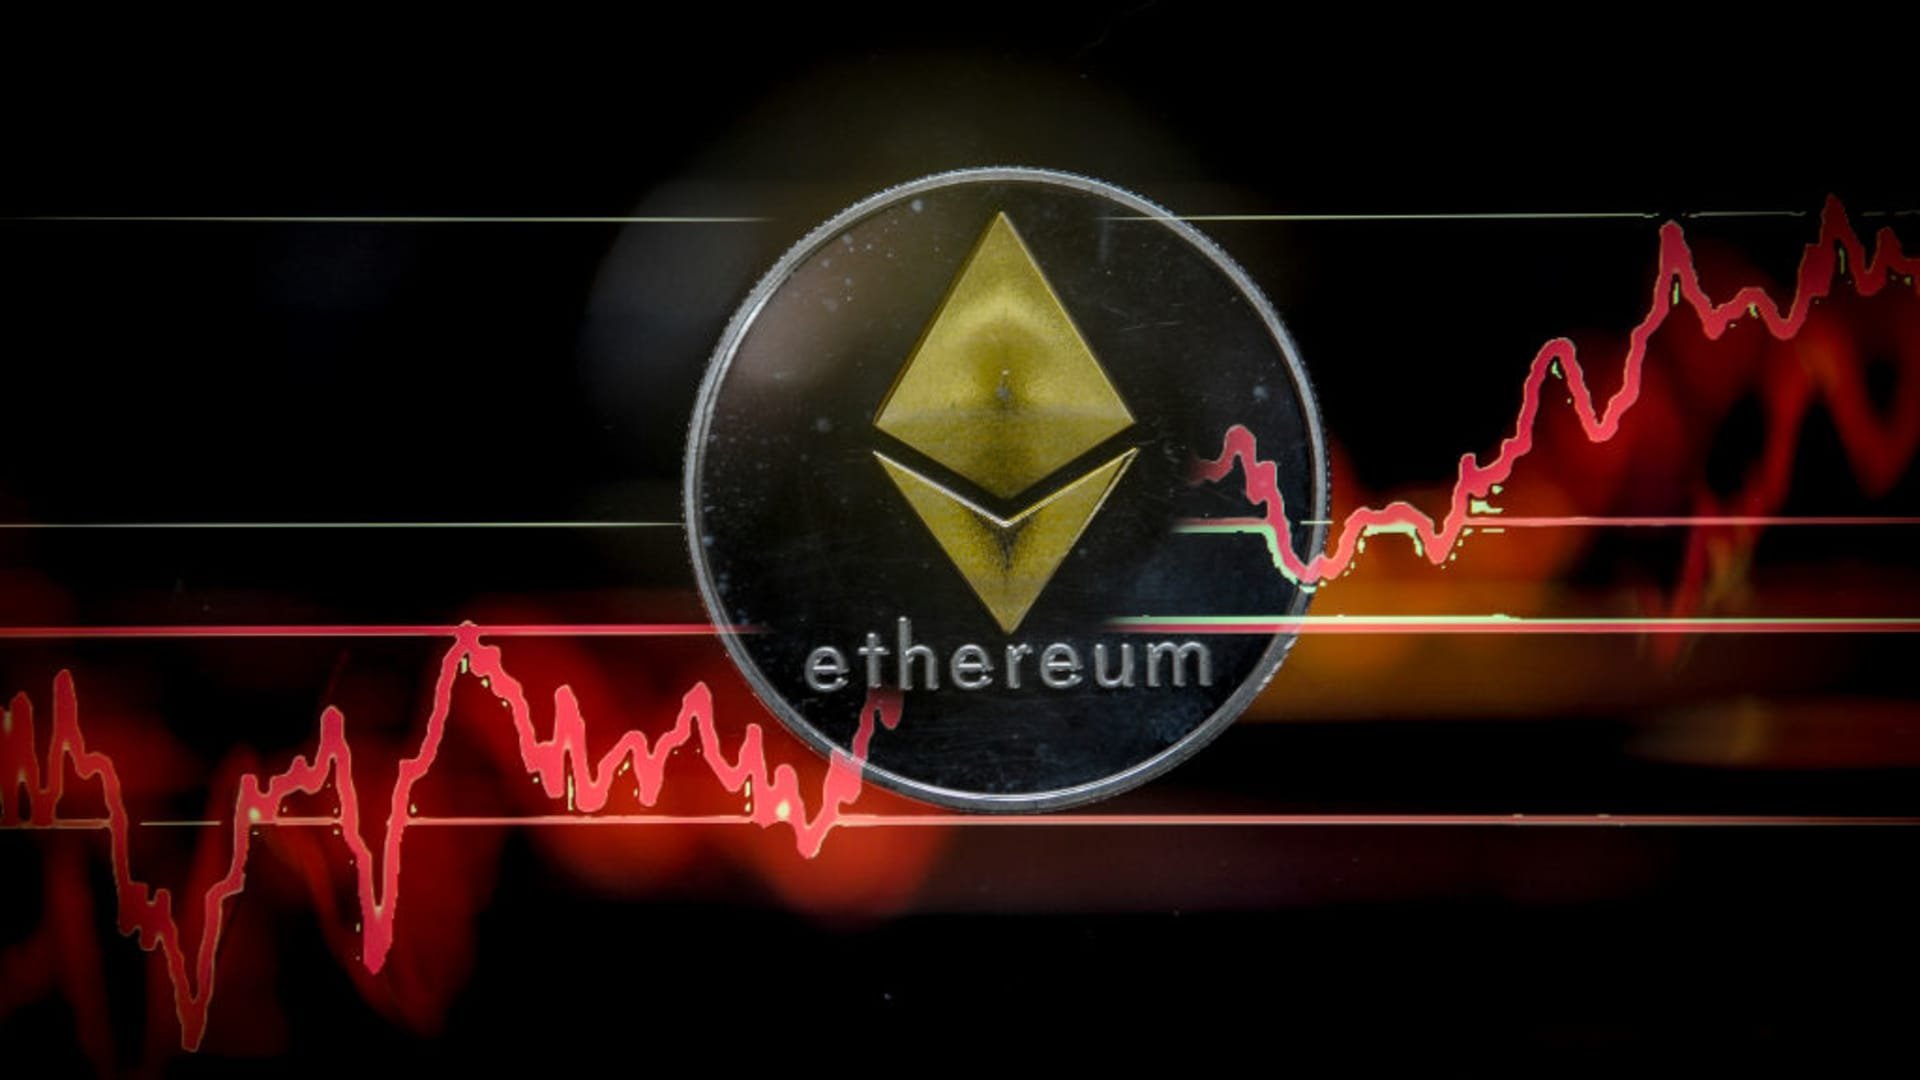 Bitcoin's biggest rival hit a record high this week — here's how to mine for ethereum